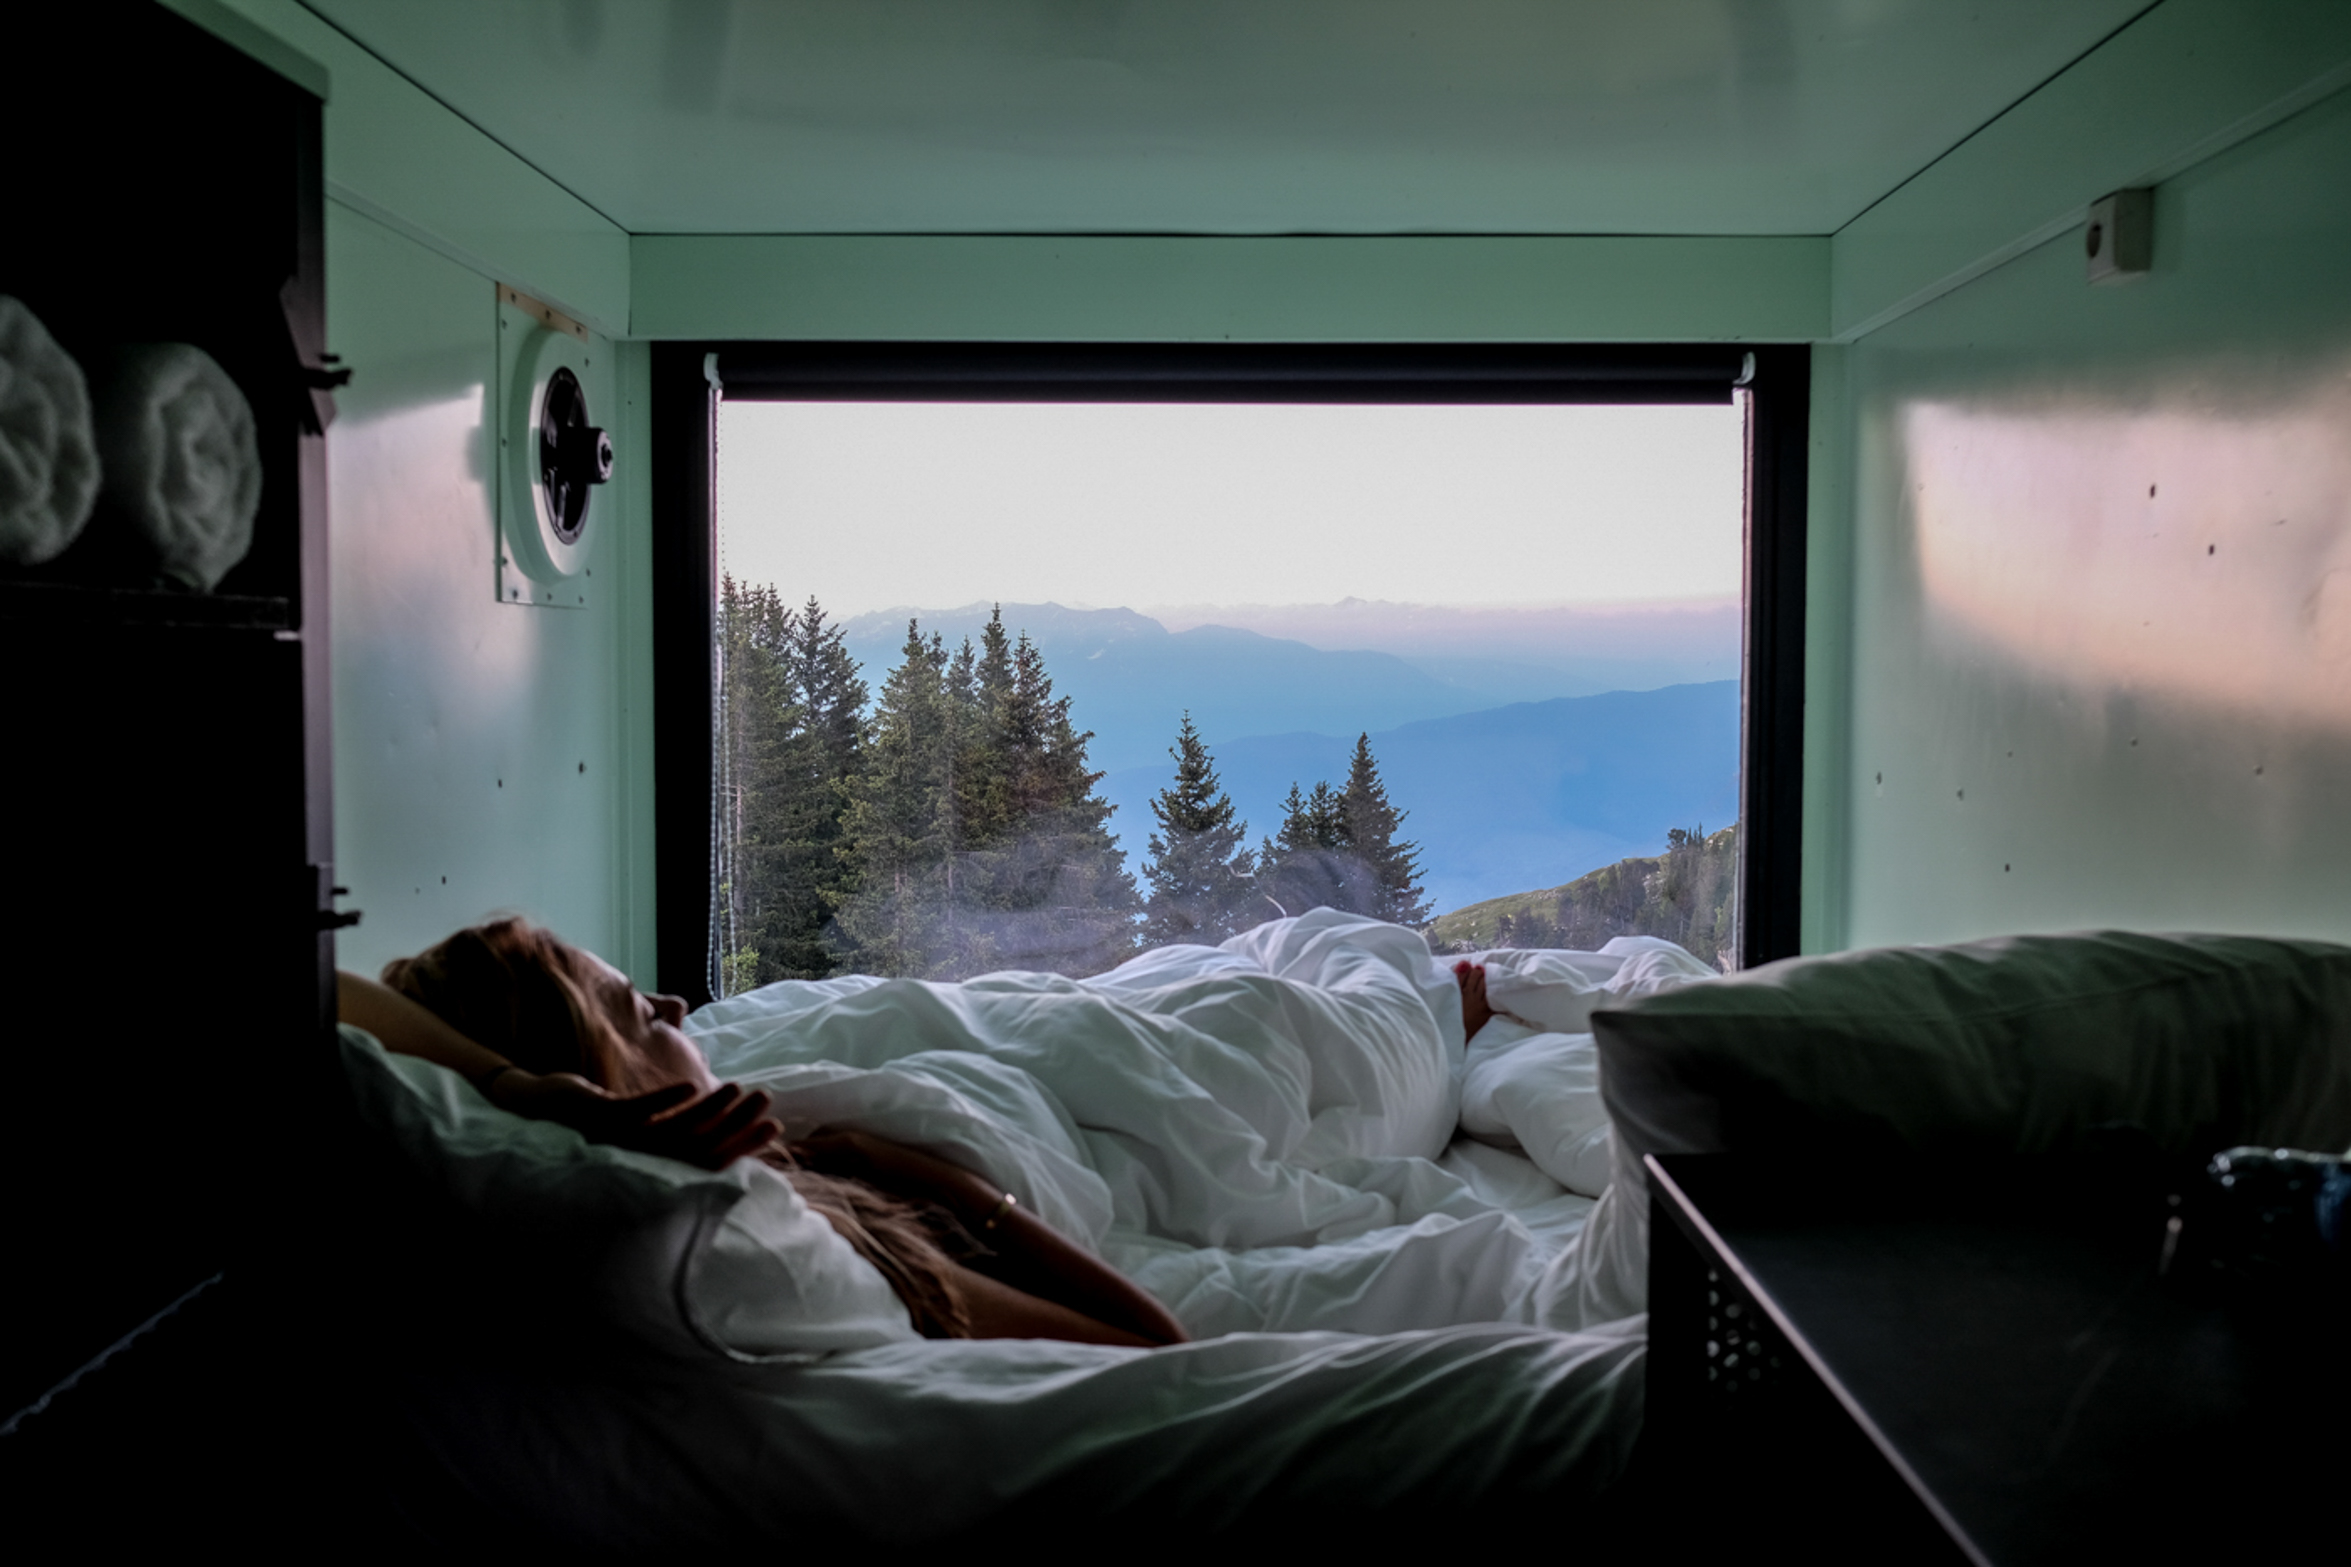 A woman lies in bed looking through the window-wall of the tiny container box she's sleeping (or woken up) in, looking over to the silhouettes of mountains with trees in the foreground